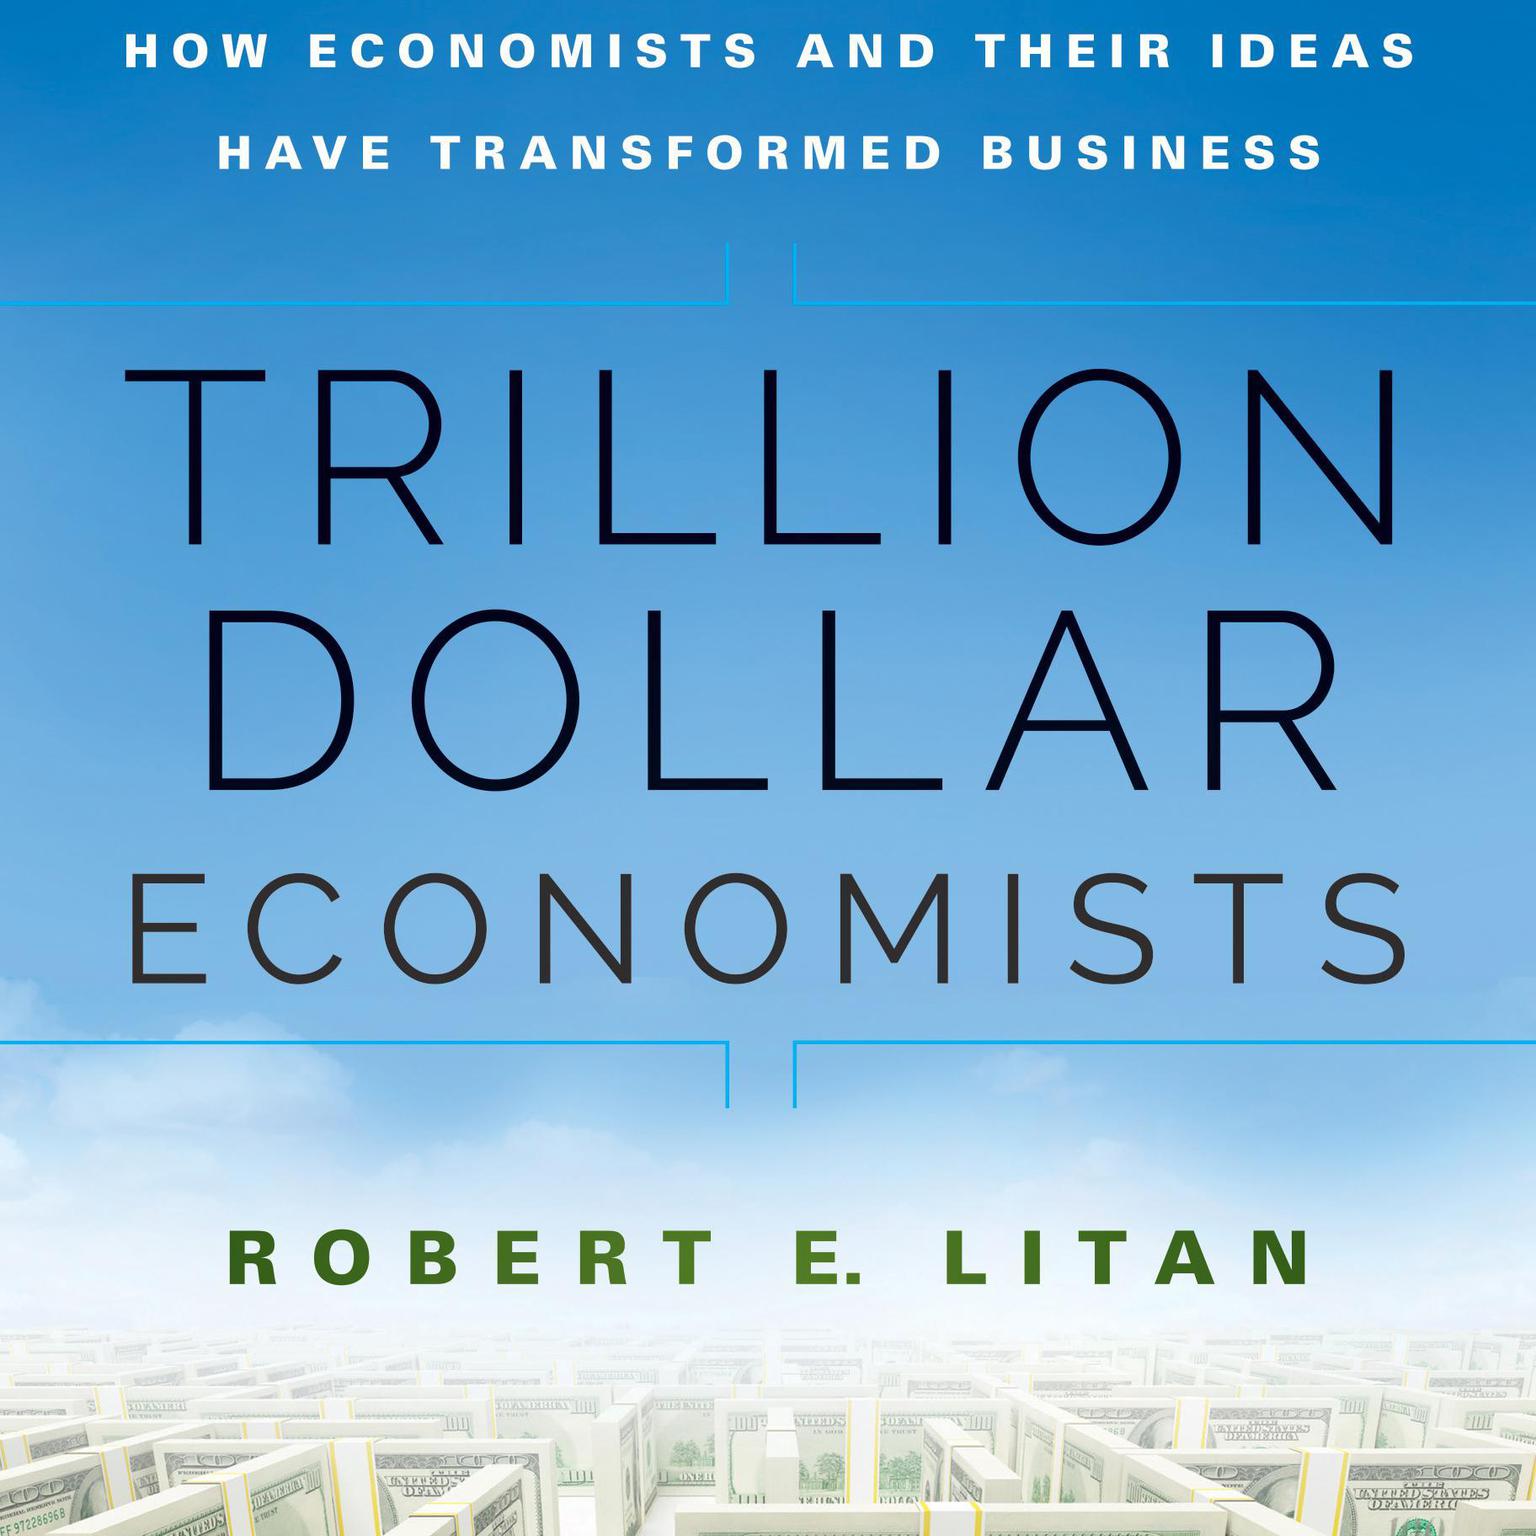 Trillion Dollar Economists: How Economists and Their Ideas have Transformed Business Audiobook, by Robert E. Litan